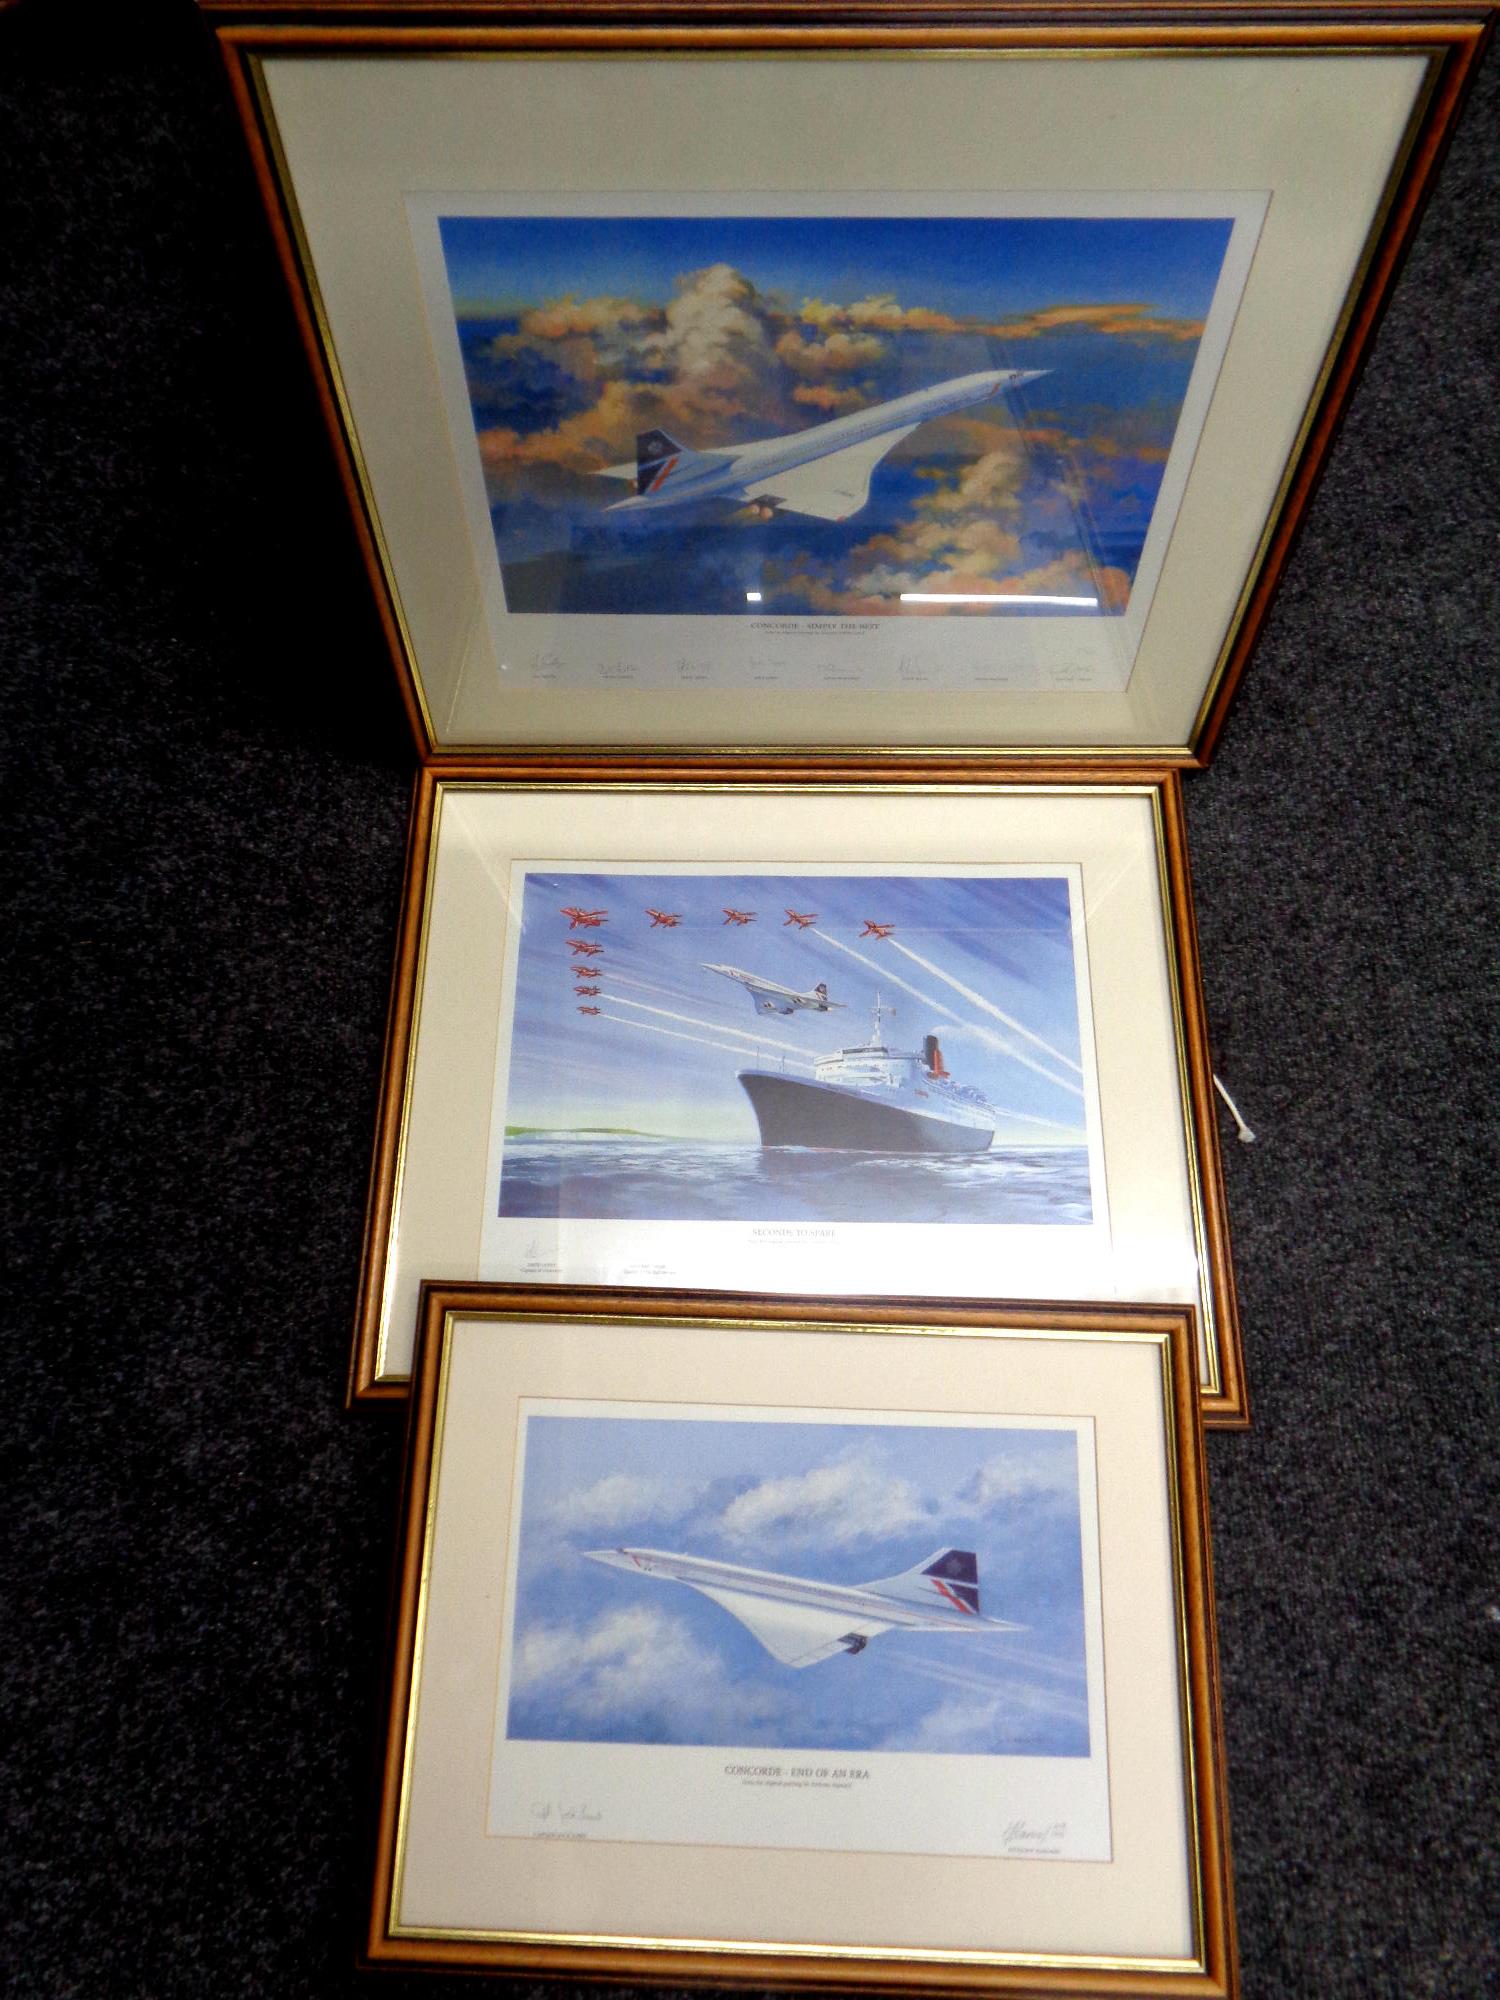 Two framed Timothy O'Brien signed limited edition prints - seconds to spare, 70 of 1950,